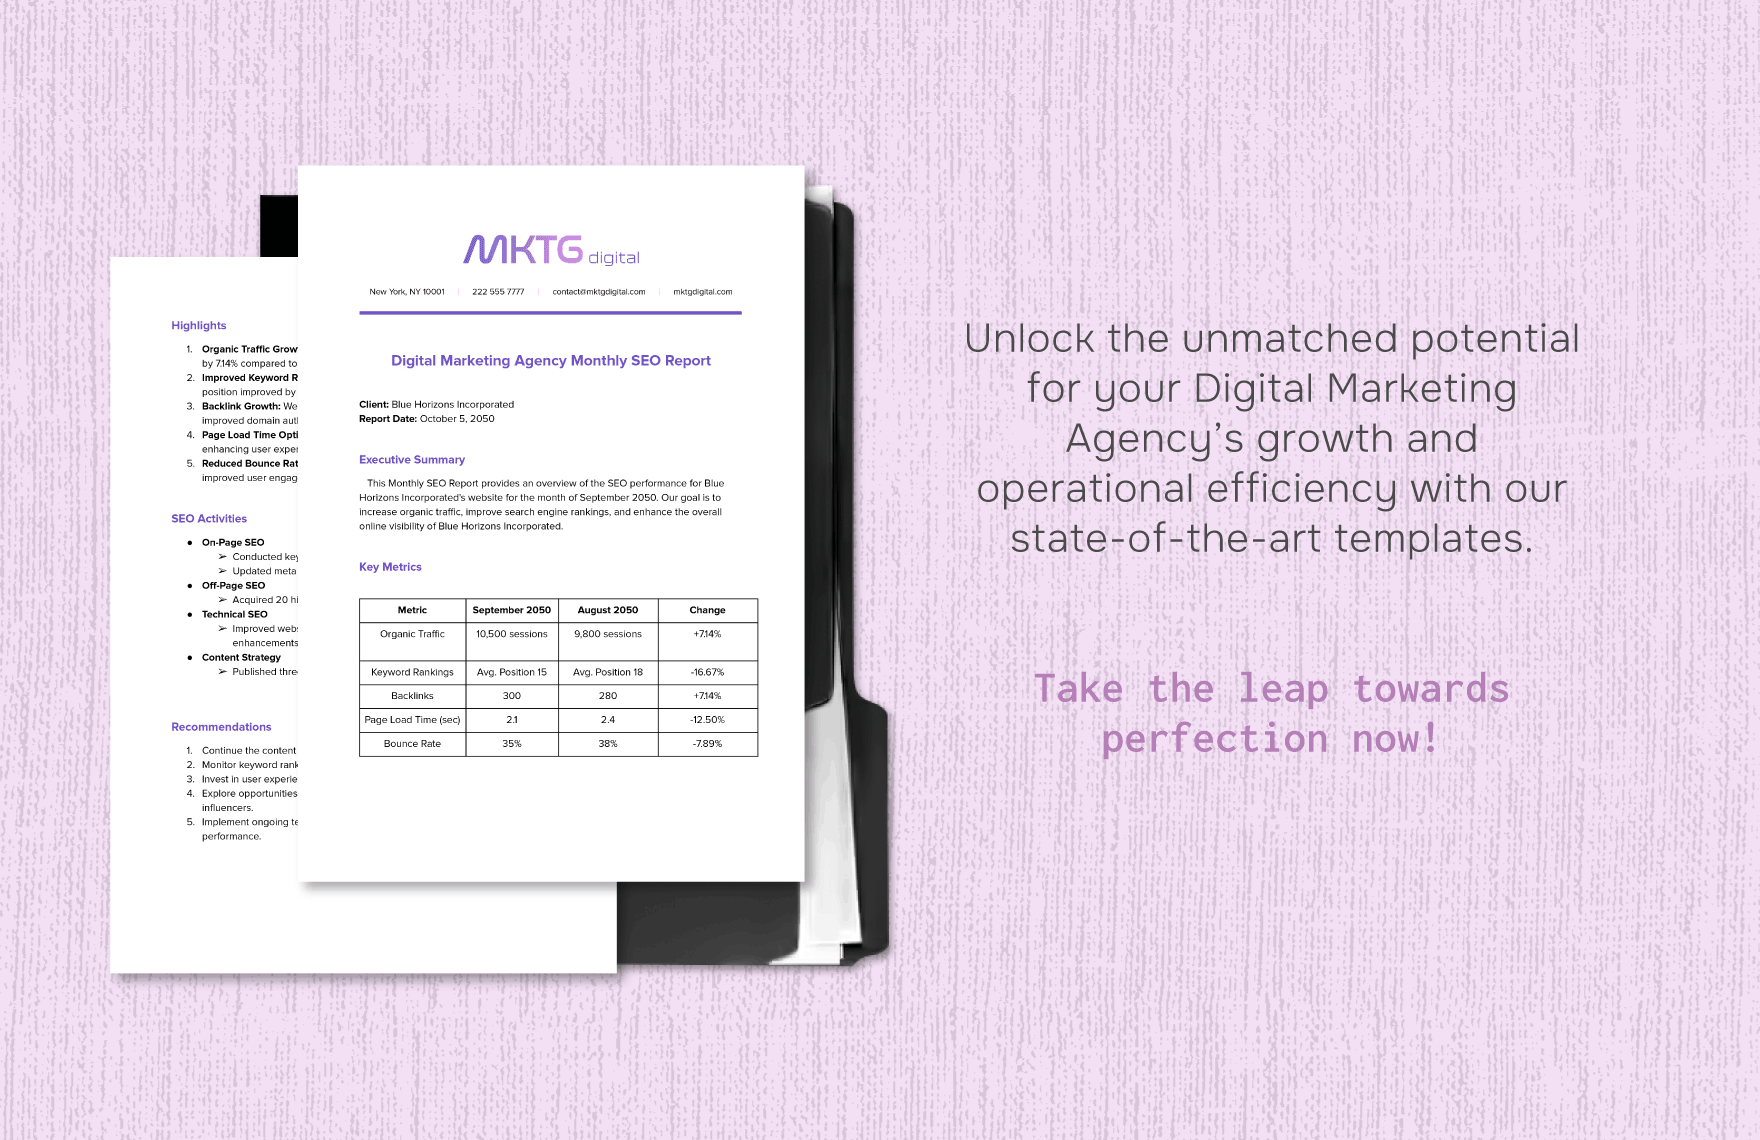 Digital Marketing Agency Monthly SEO Report Template